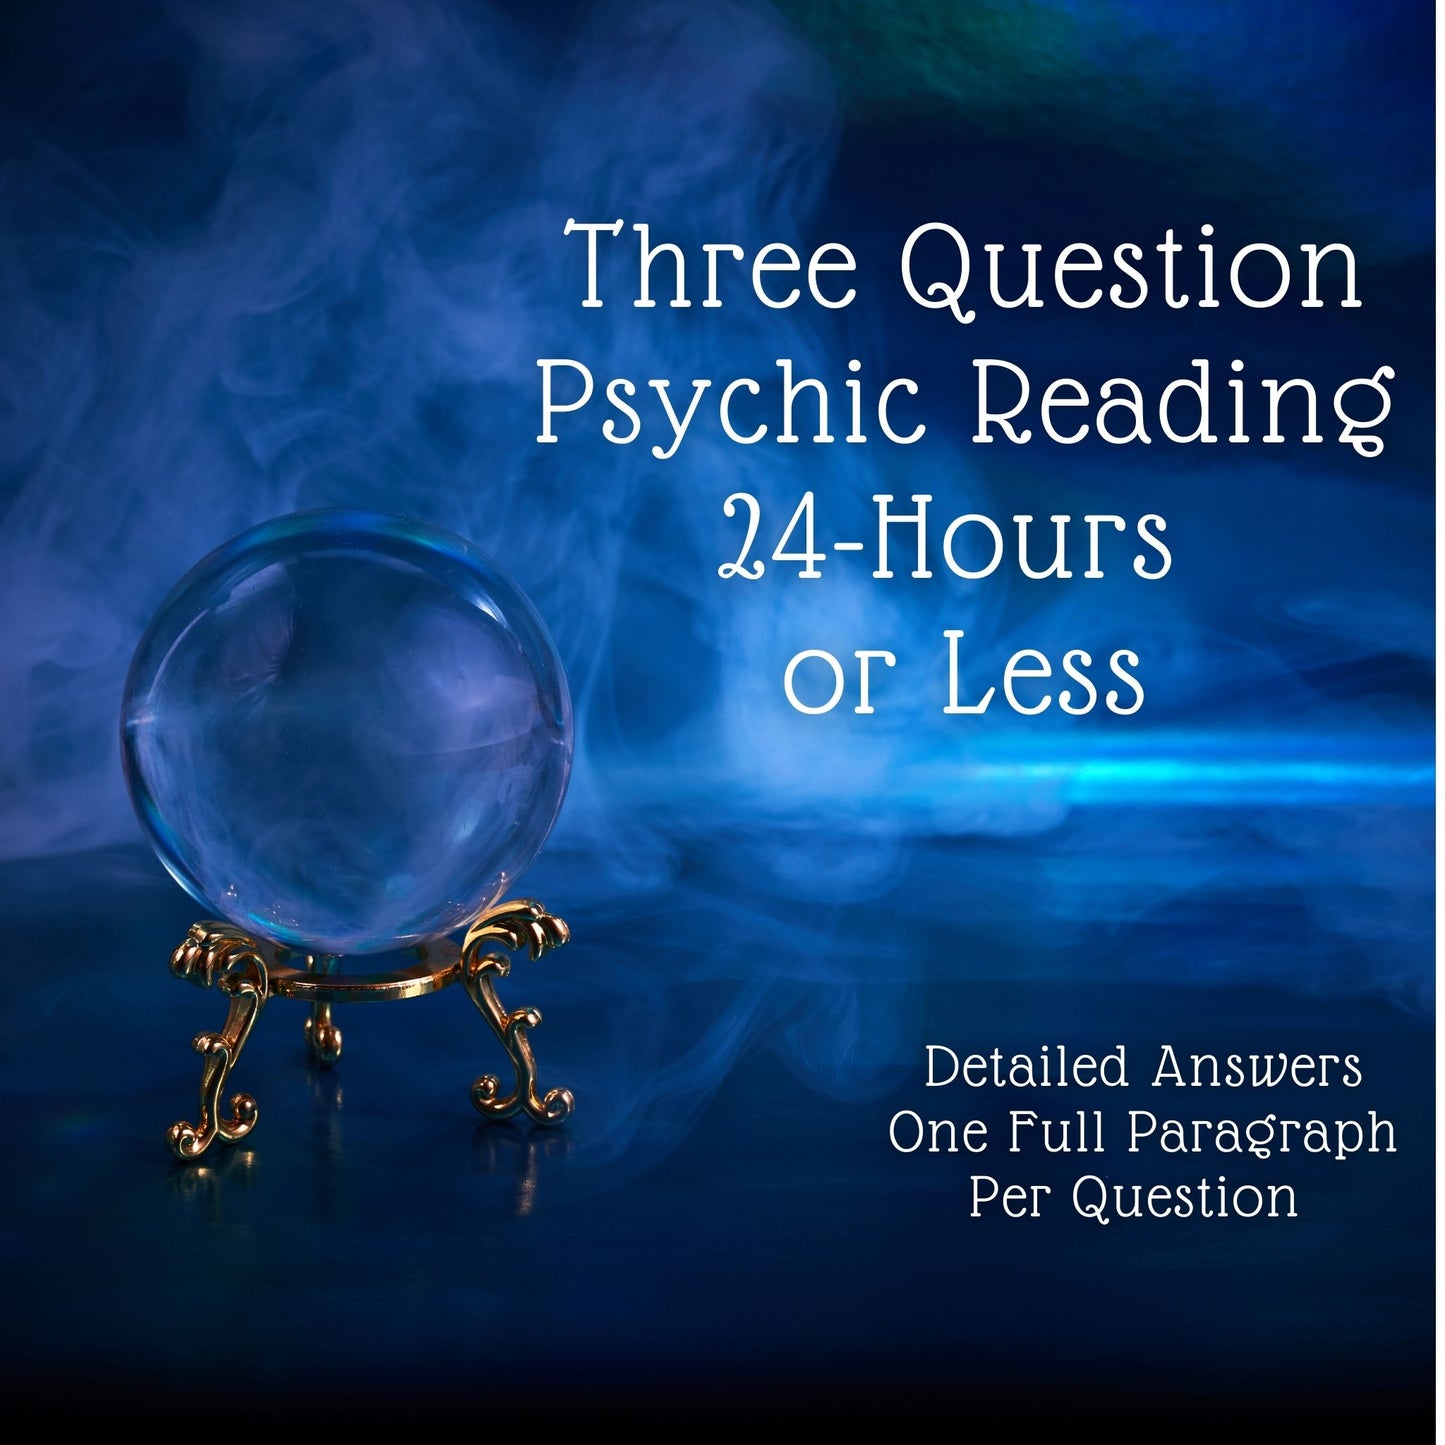 Three Question Psychic Reading, Detailed Answer, 24-Hours or Less